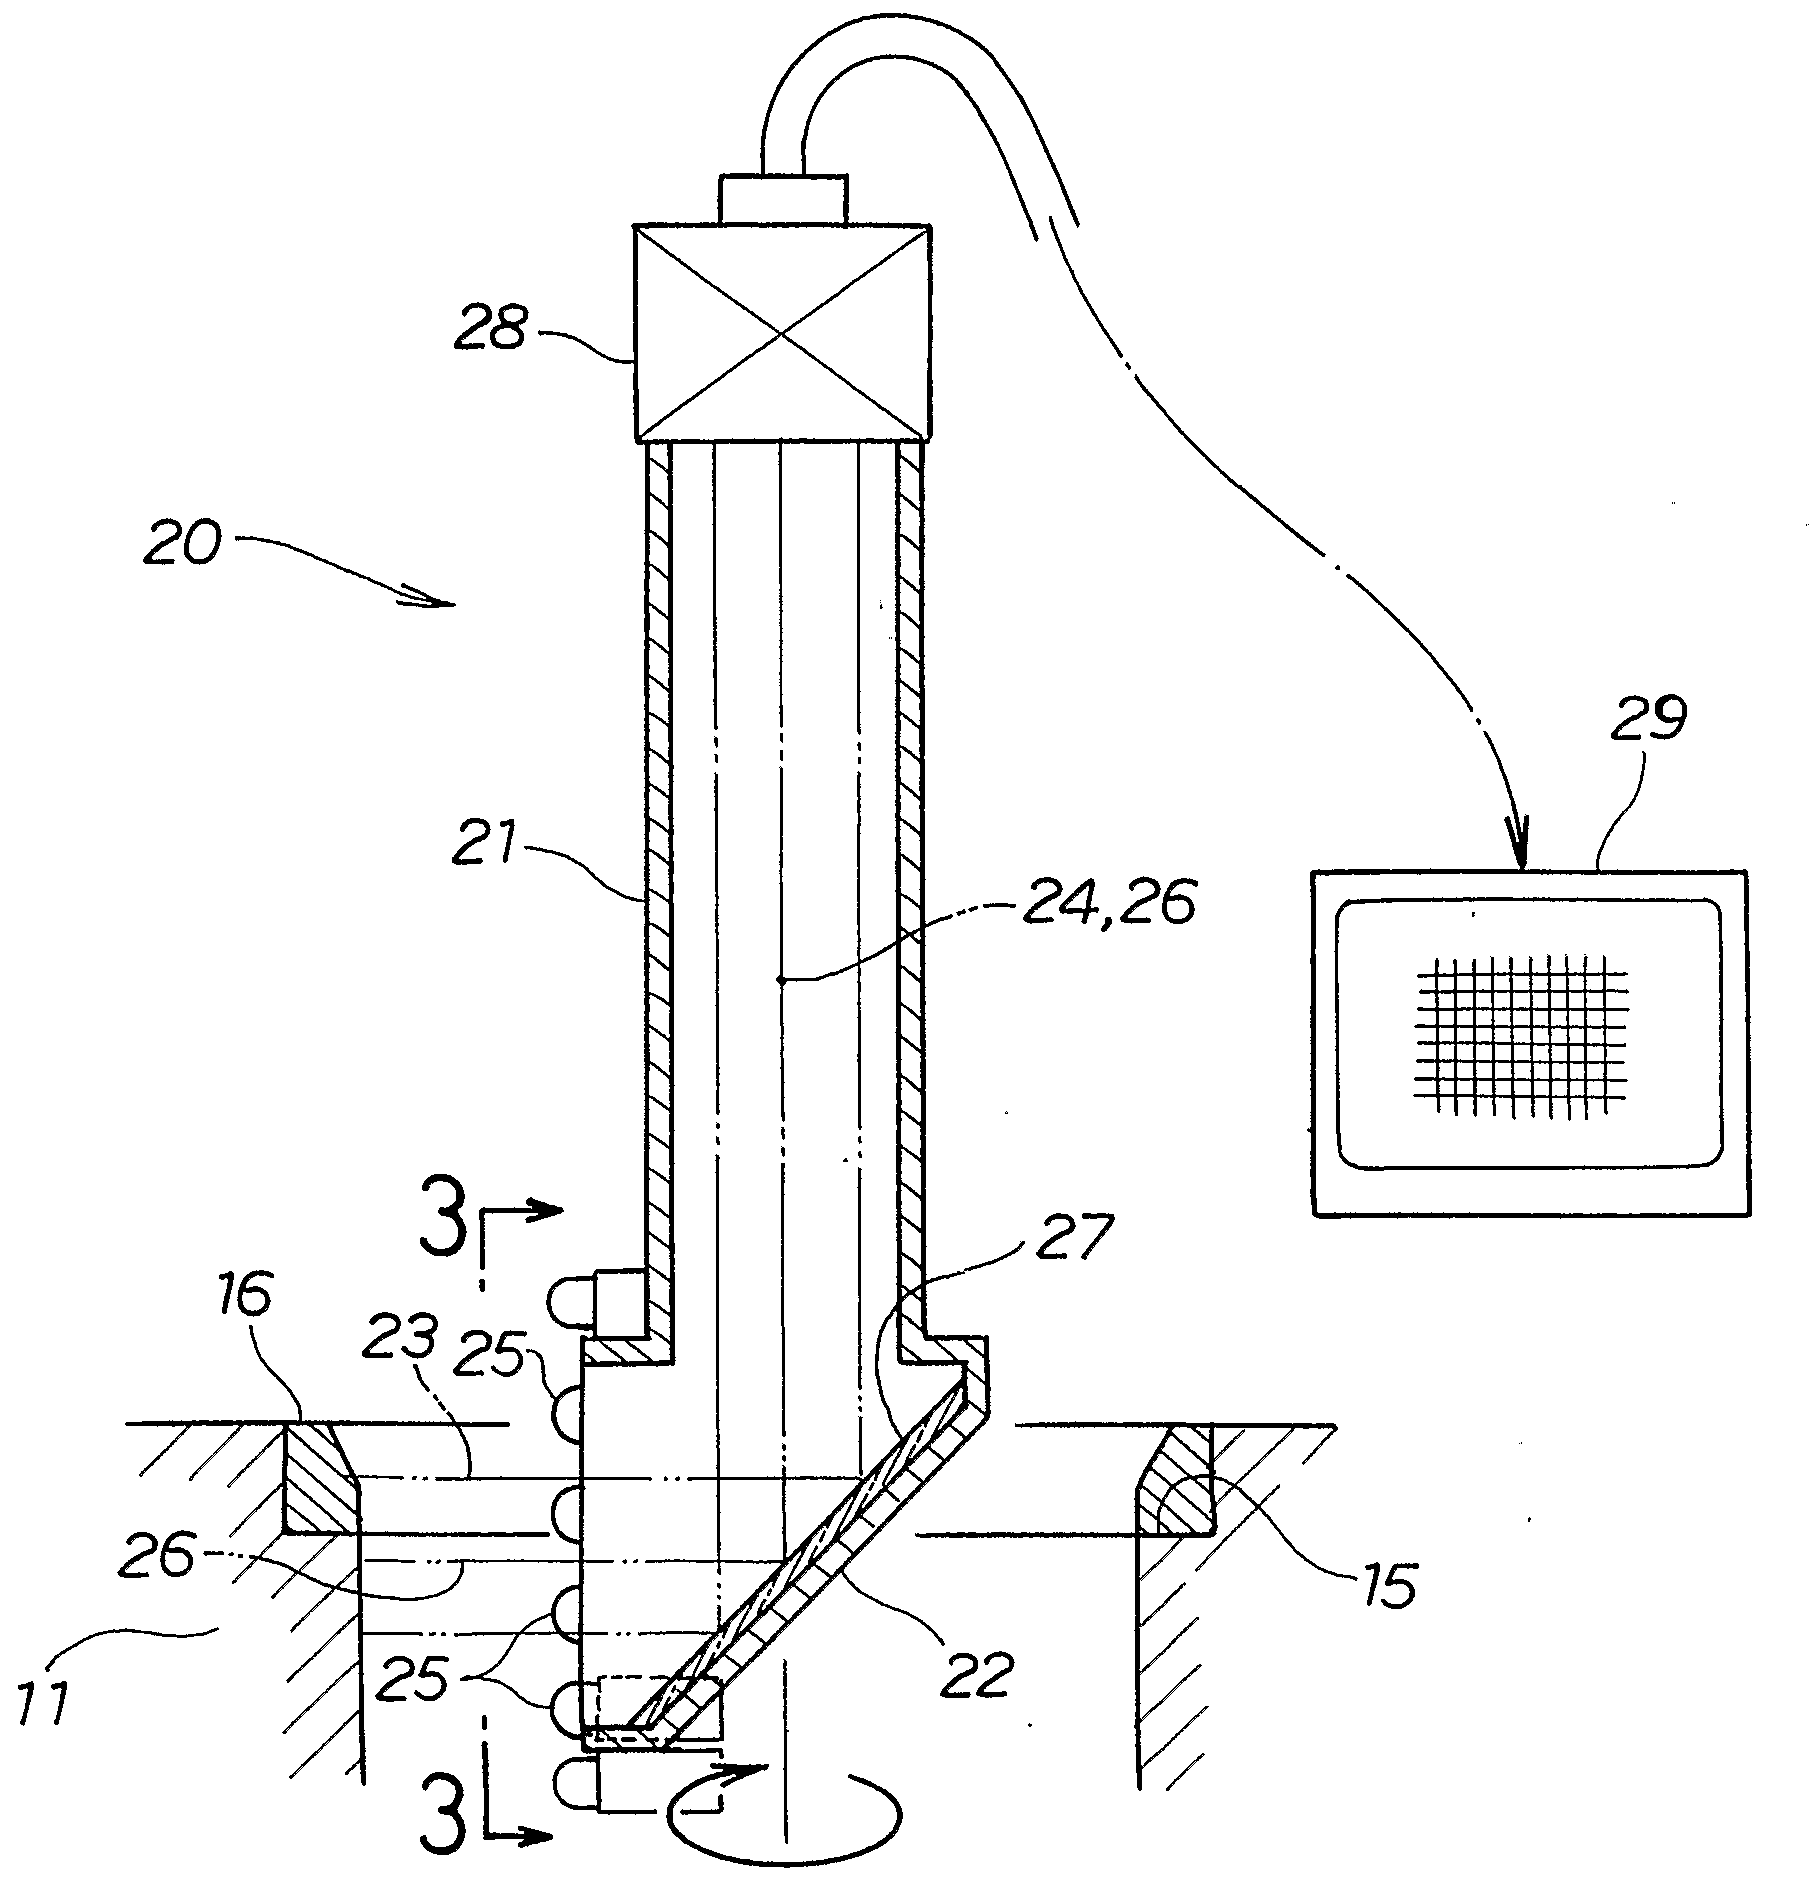 Measurement of gaps between valve seats and attachment parts